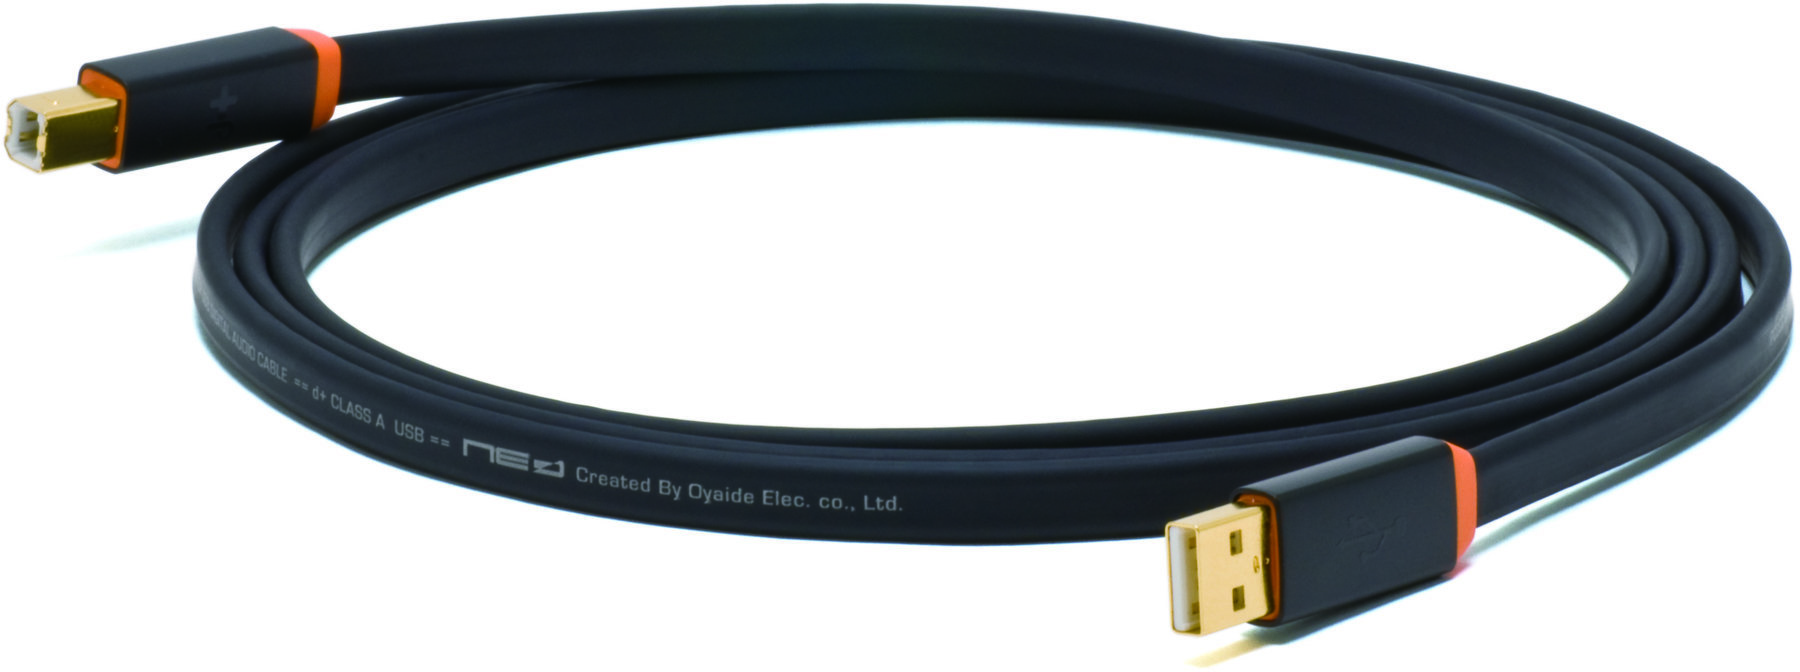 USB Cable Oyaide NEO d+ USB 2.0 Class A 1m